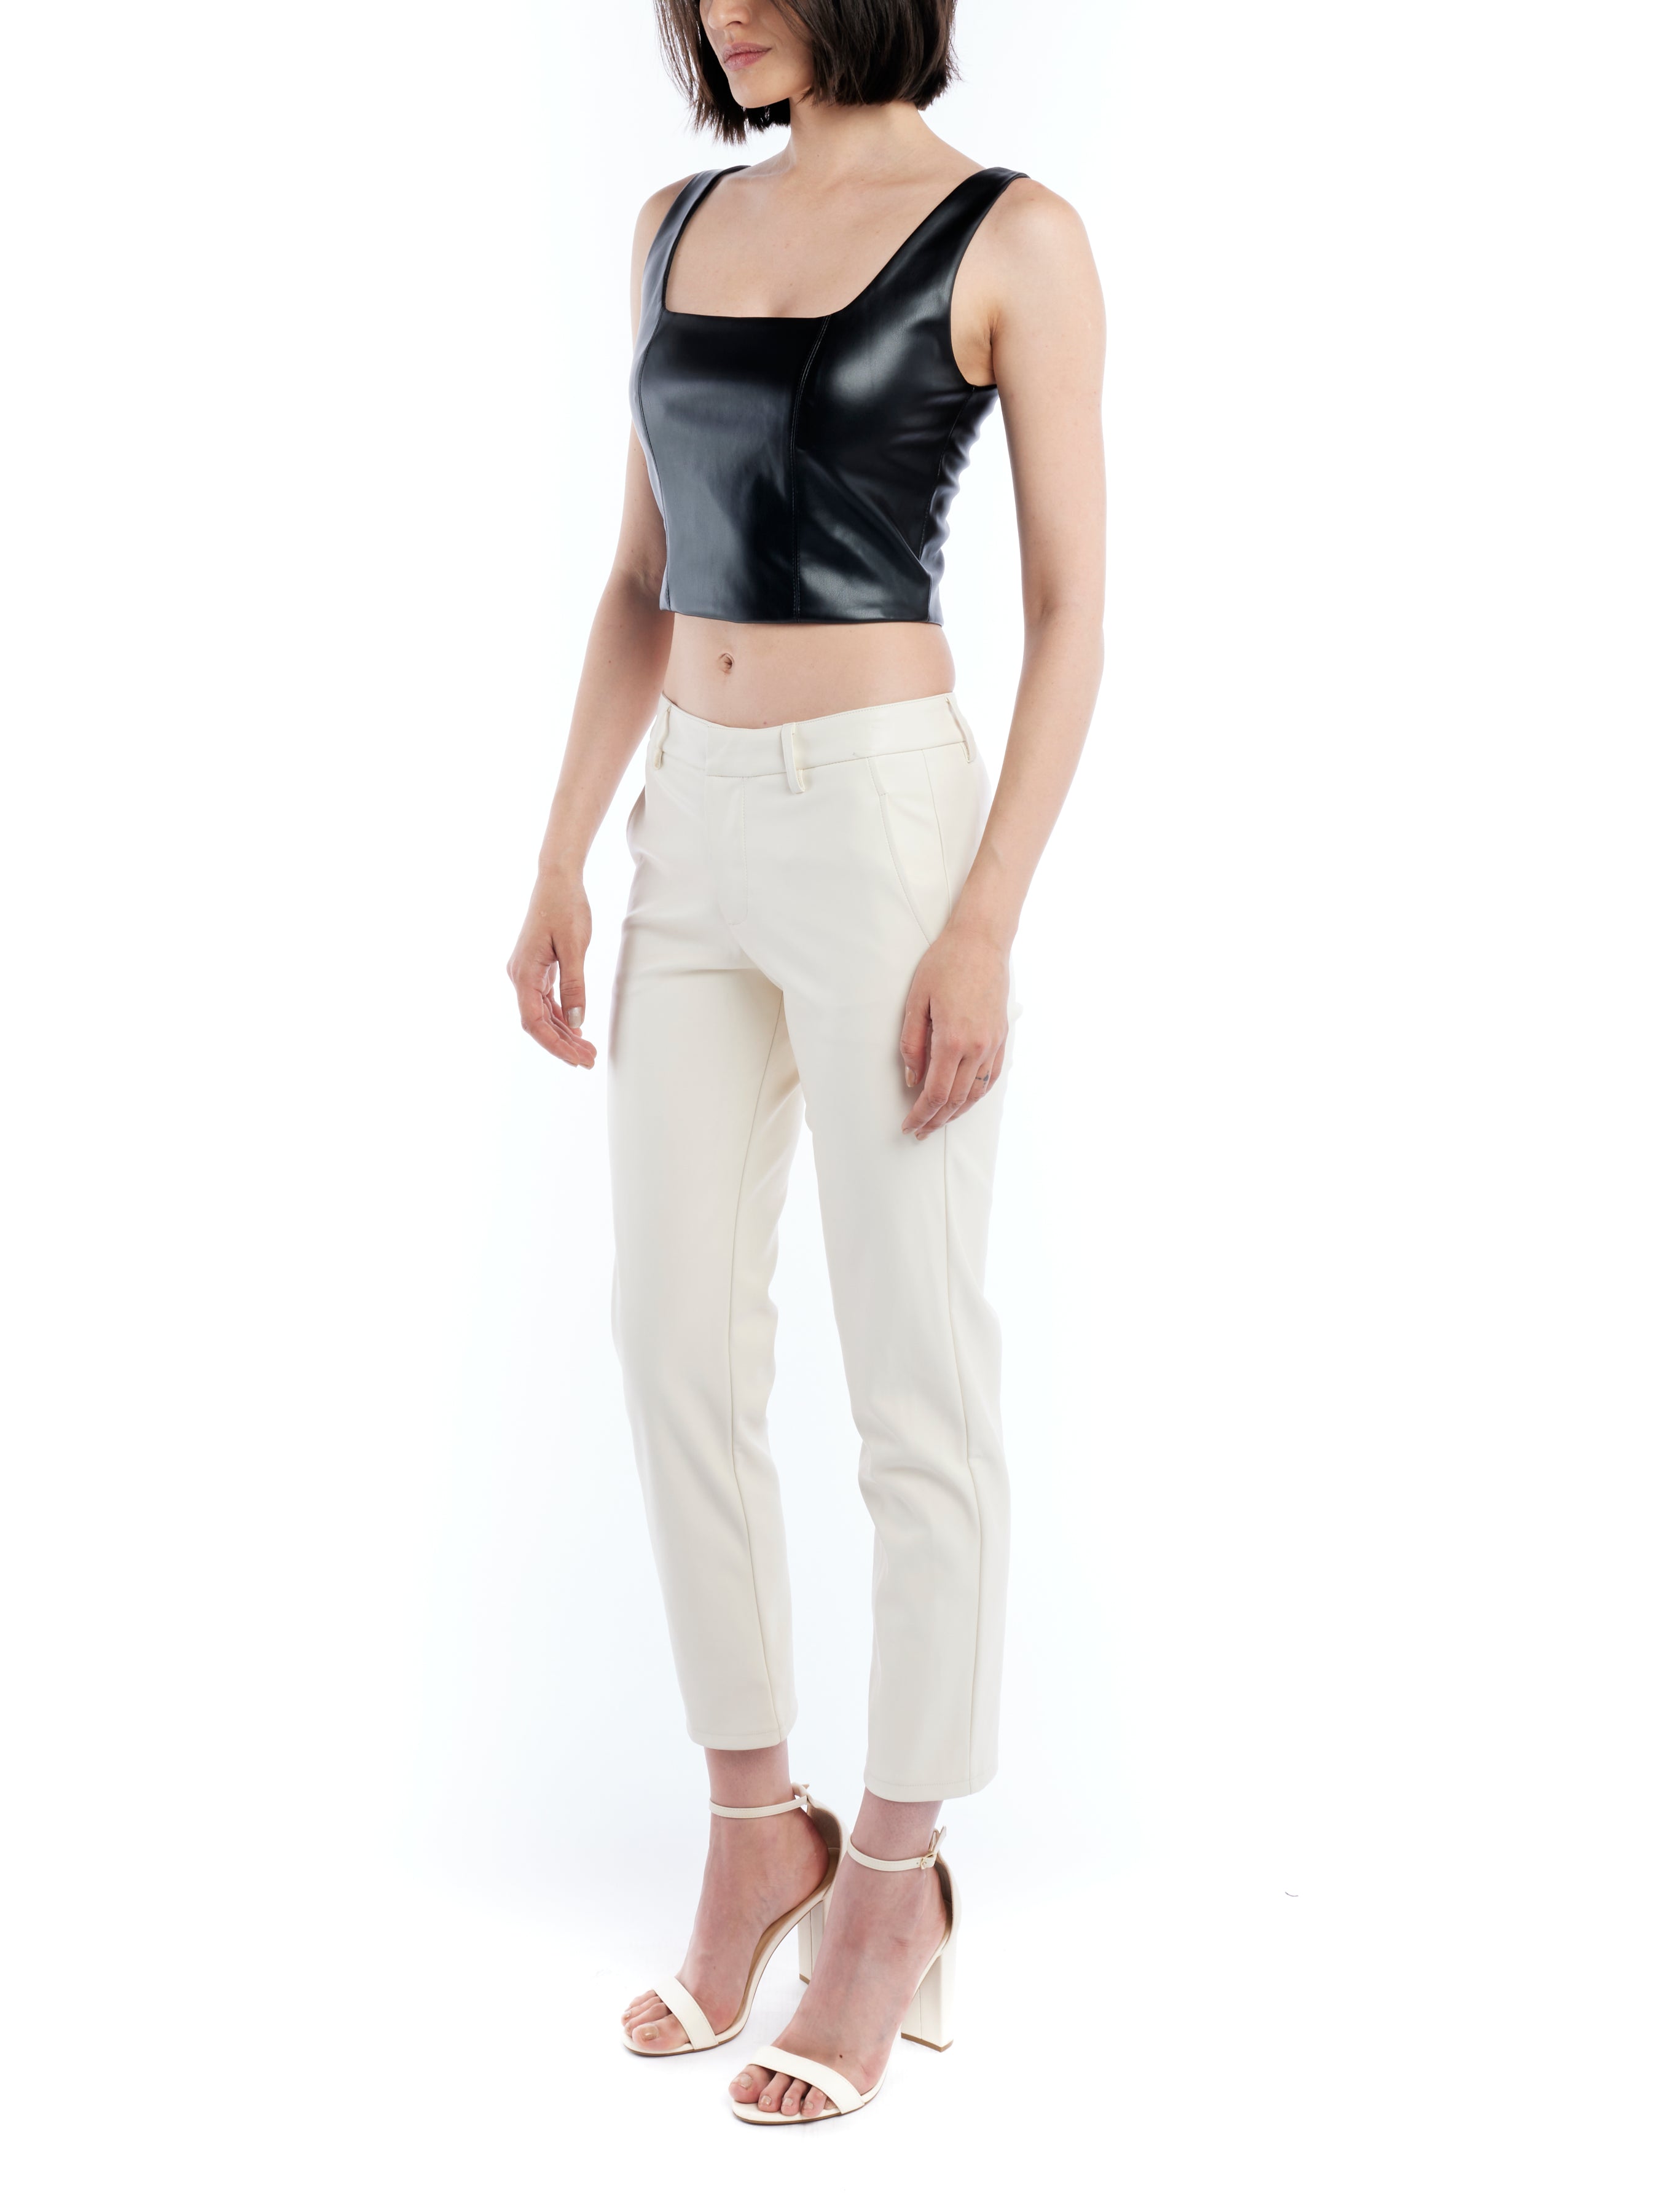 Faux leather bustier with tanks sleeves, square neck and cropped length - black 